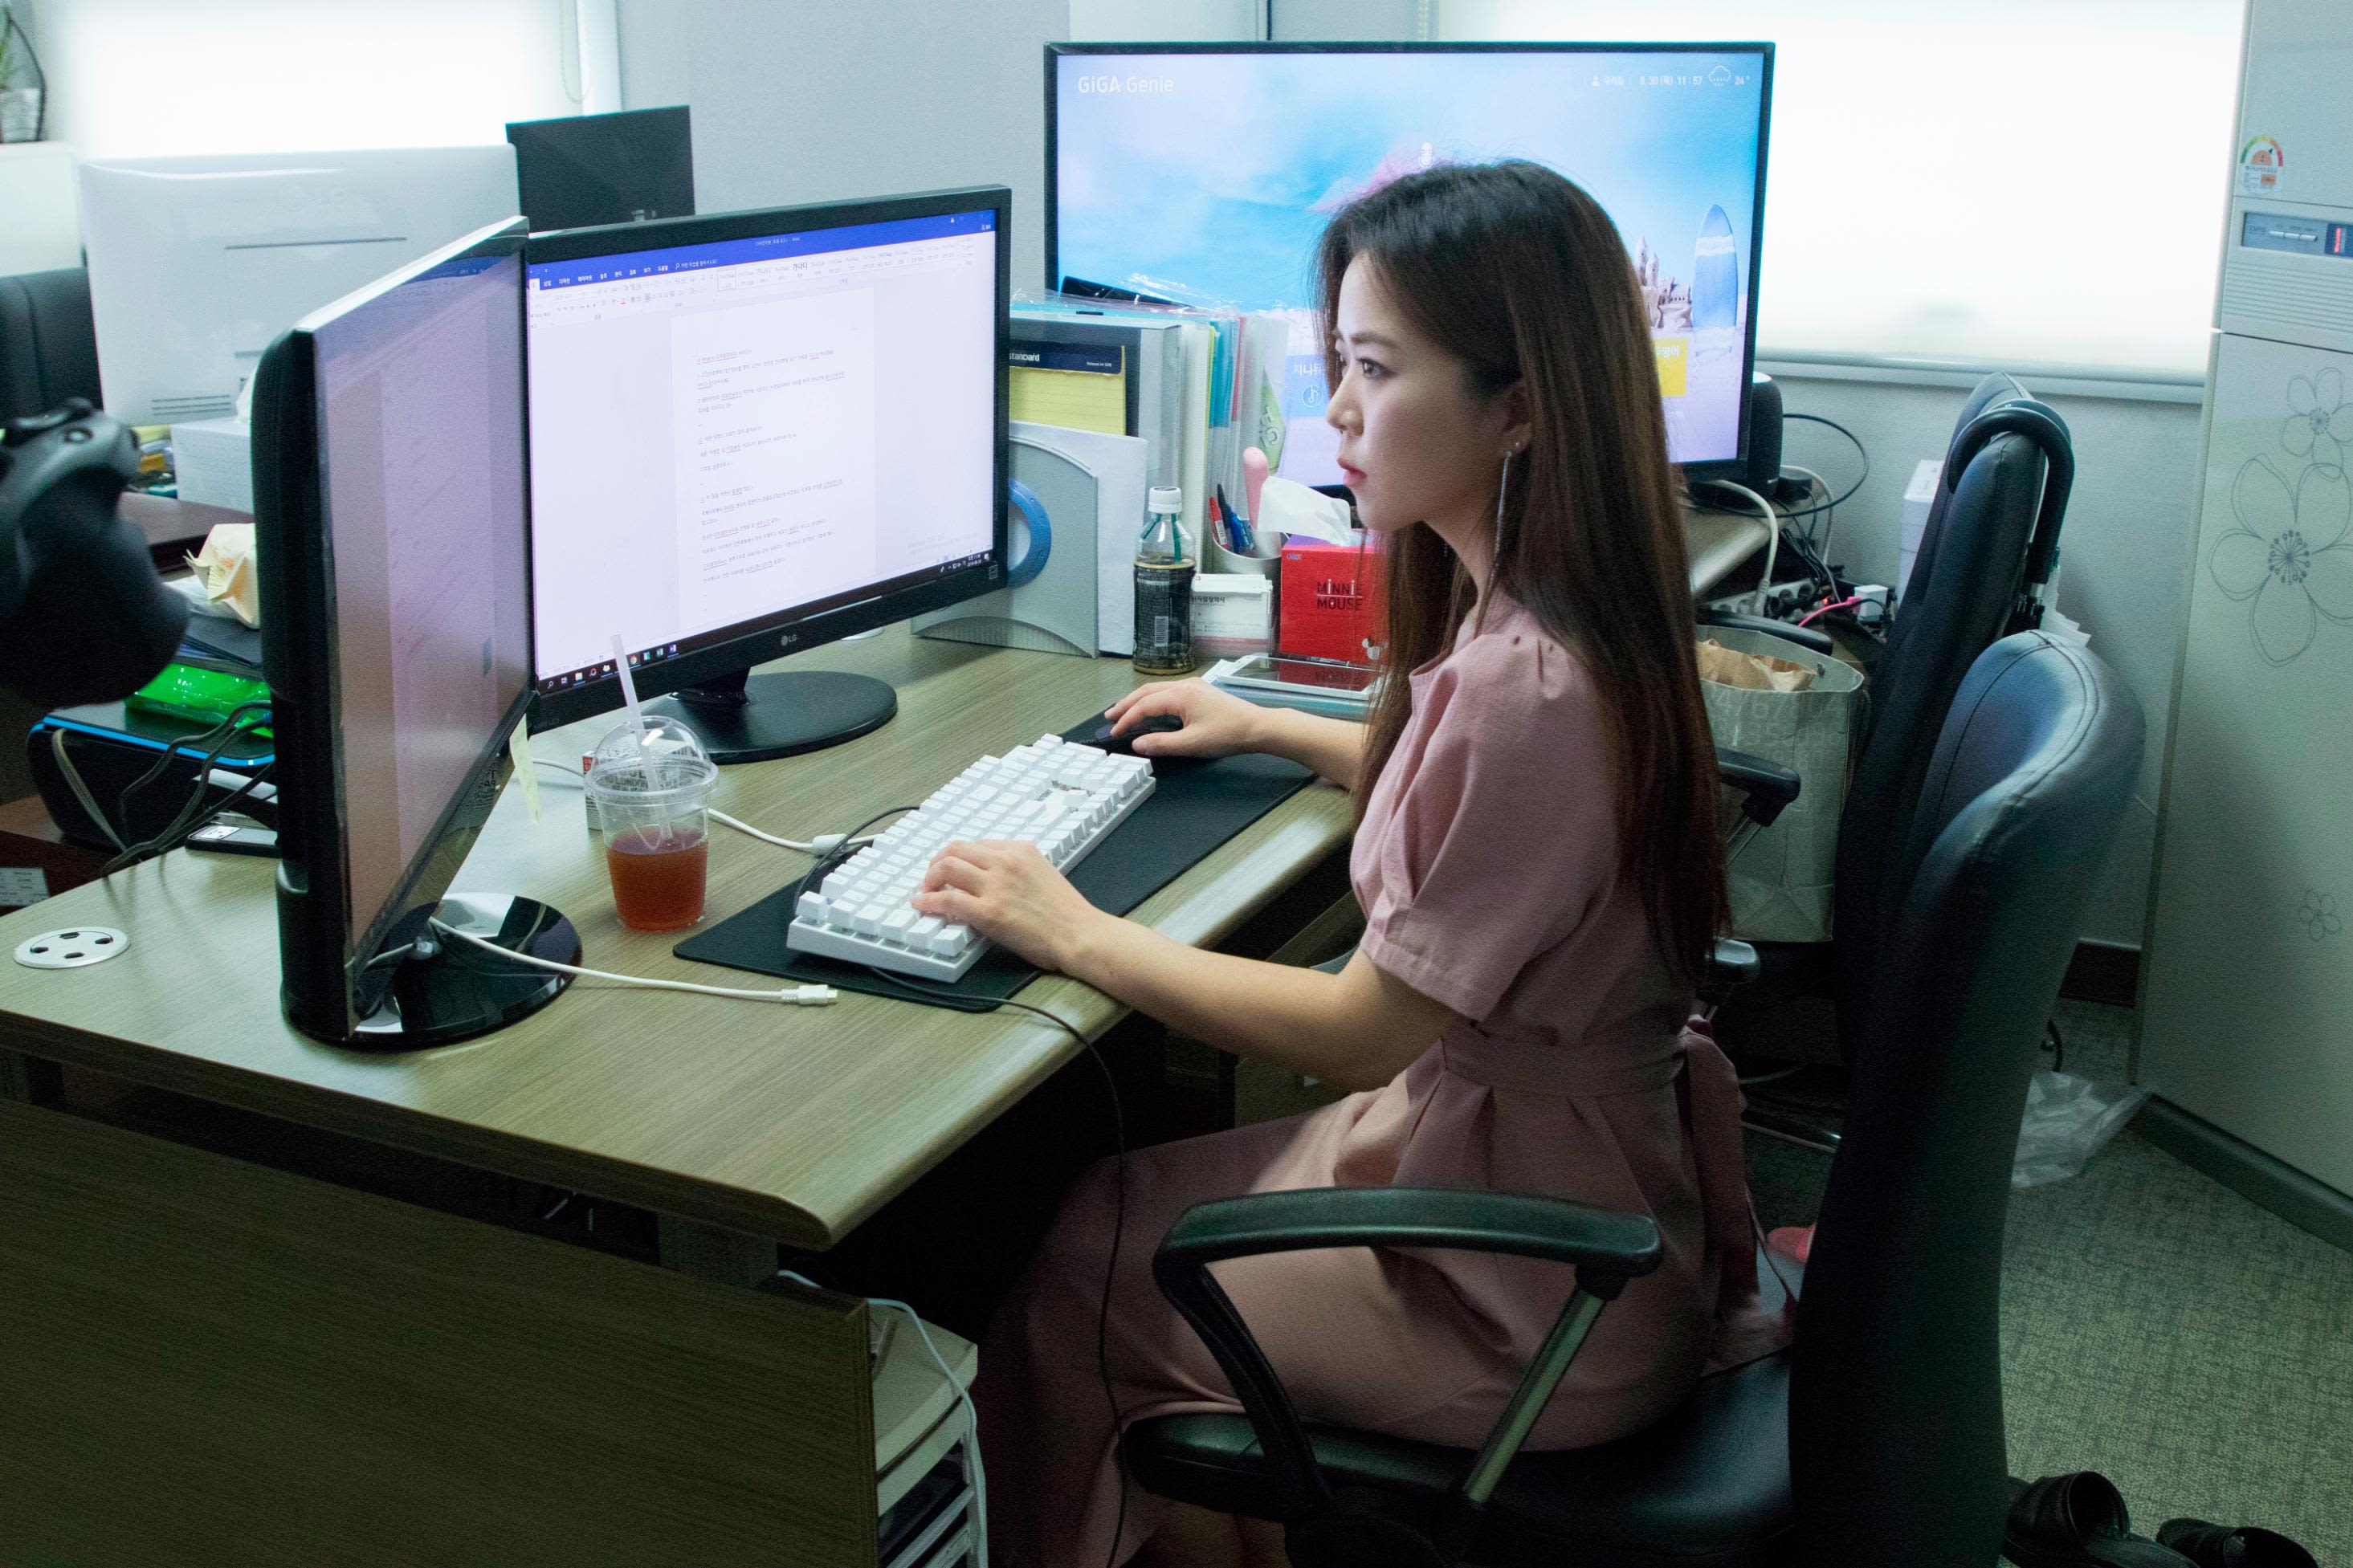 Candid Upskirt Sleeping - Upskirt crisis: Spy cams and secret filming abound in South Korea as police  promise crackdown | CNN